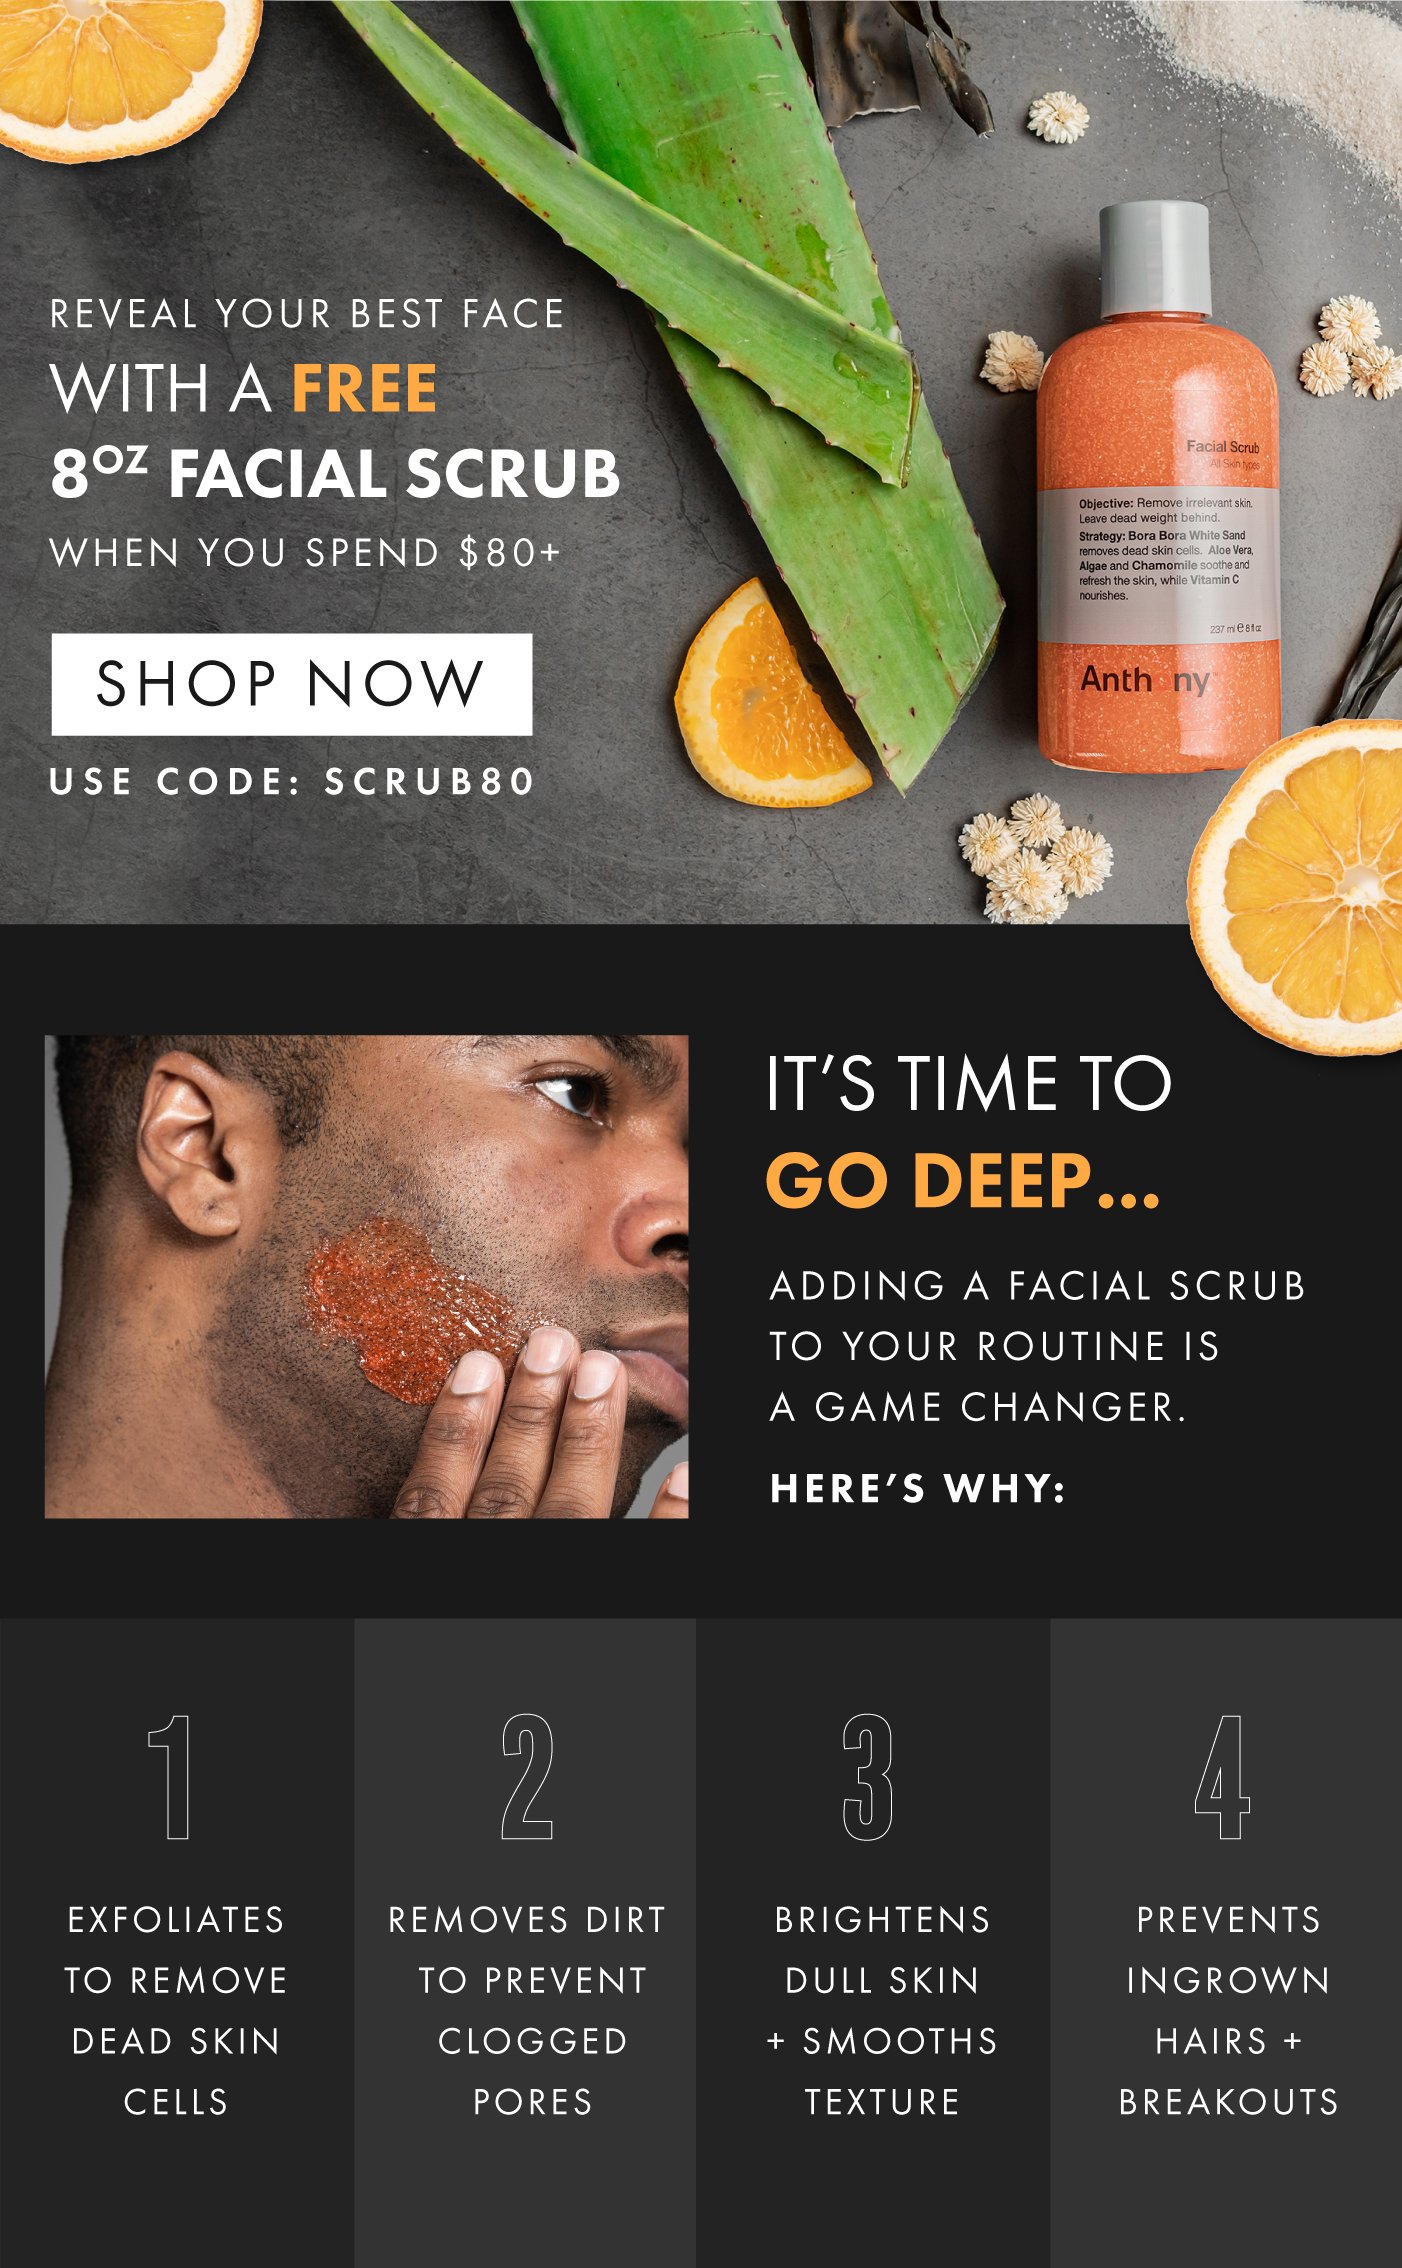 Reveal your best face with a free 8oz facial scrub